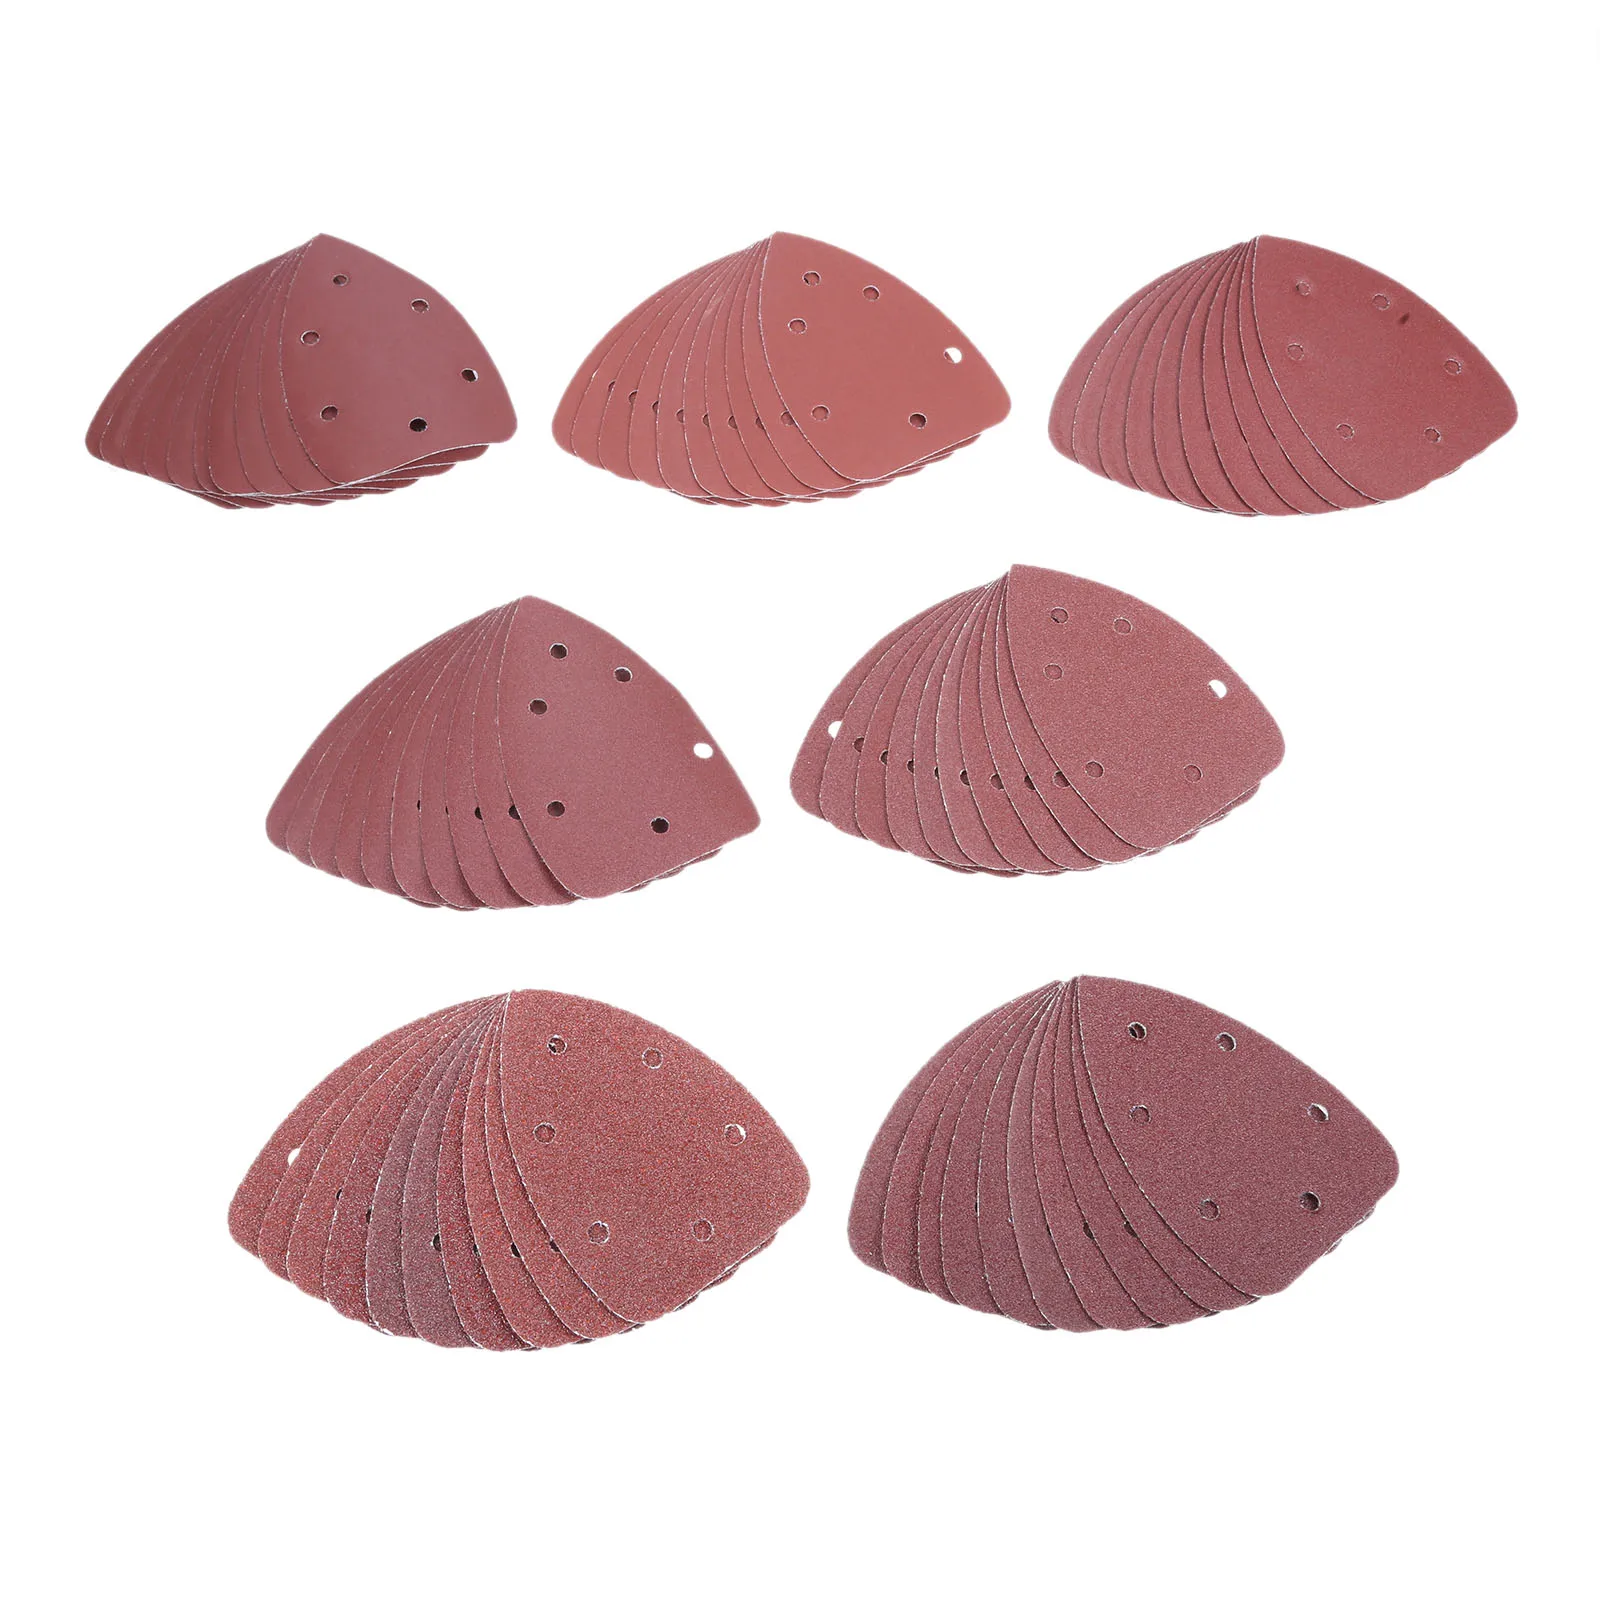 

10PCS 6 Hole 140x140x98mm Sandpapers for Car Wood Metal Furniture Sanding Grinding Abrasive Tools 40/60/80/120/180/240/320 grits